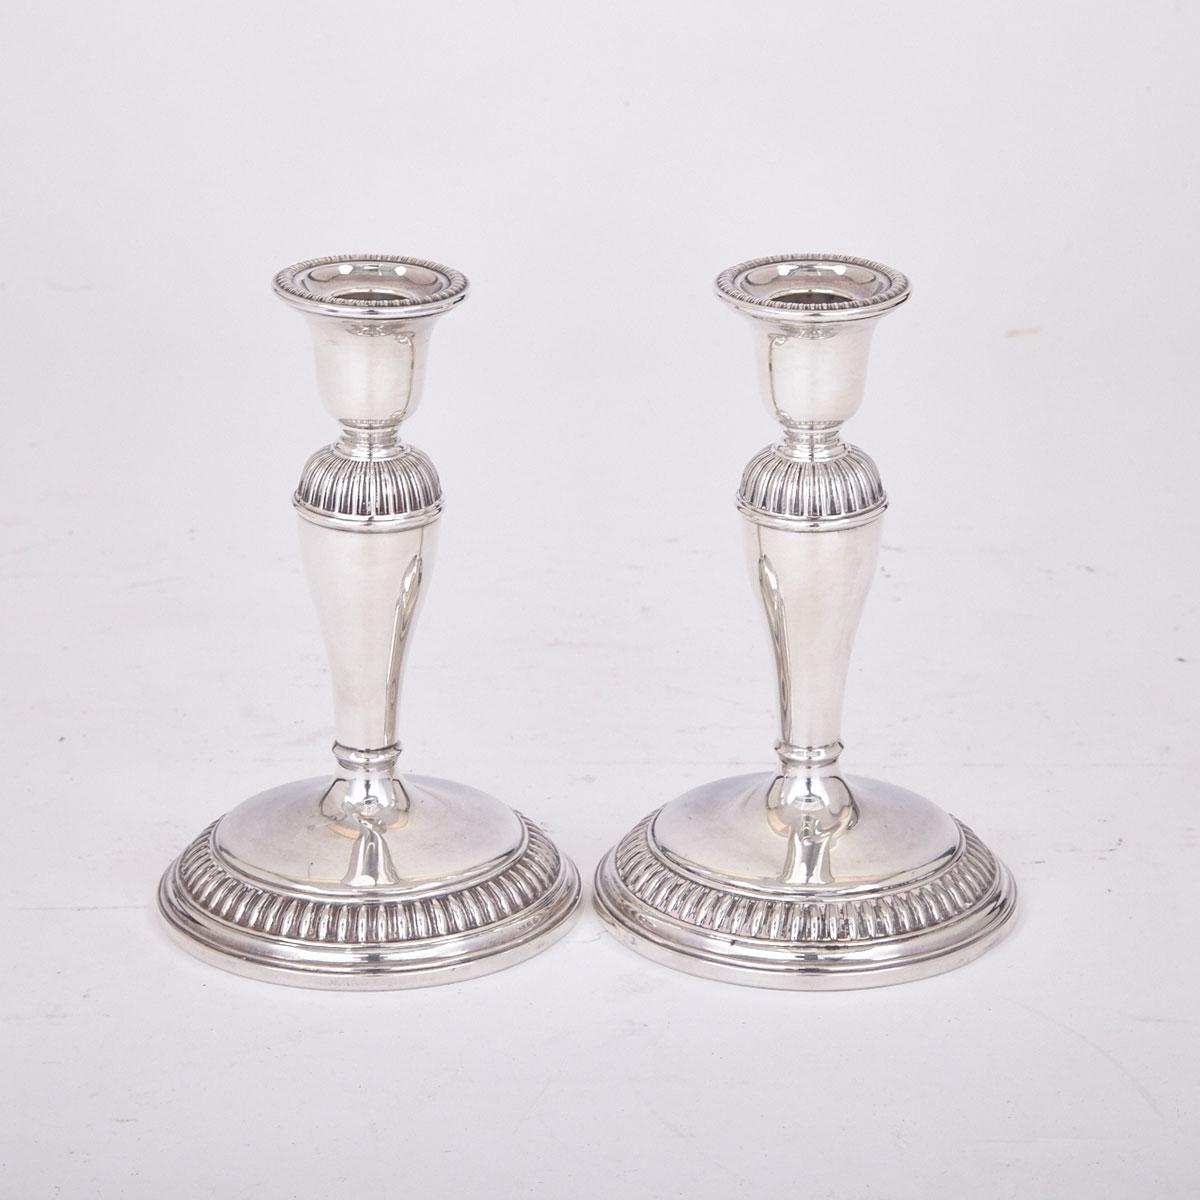 Pair of Canadian Silver Table Candlesticks, Henry Birks & Sons, Montreal, Que., 20th century